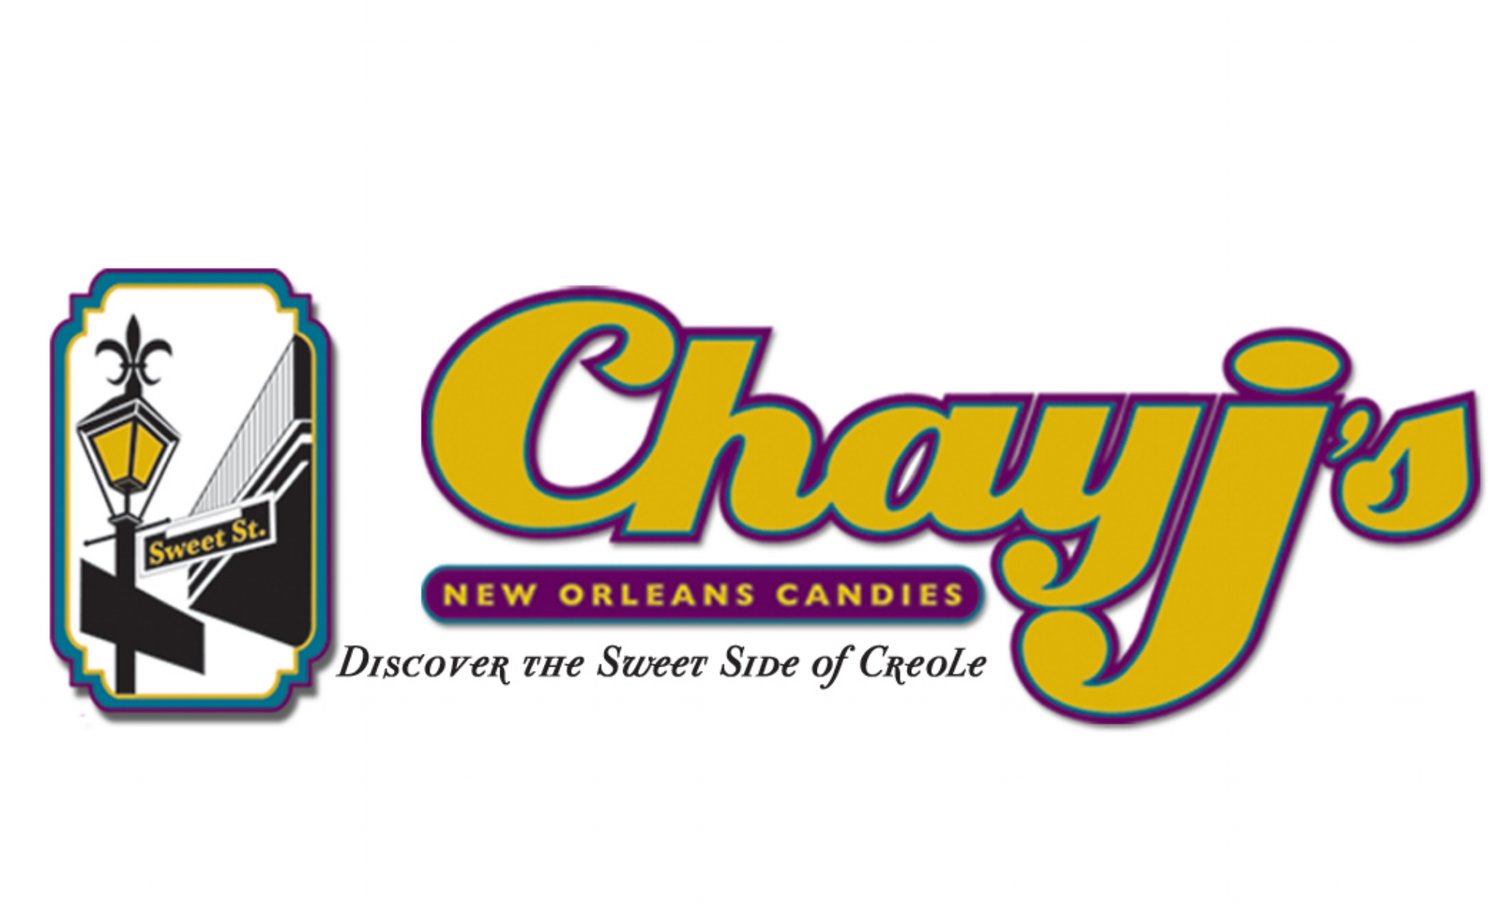 Chay J's New Orleans Candies